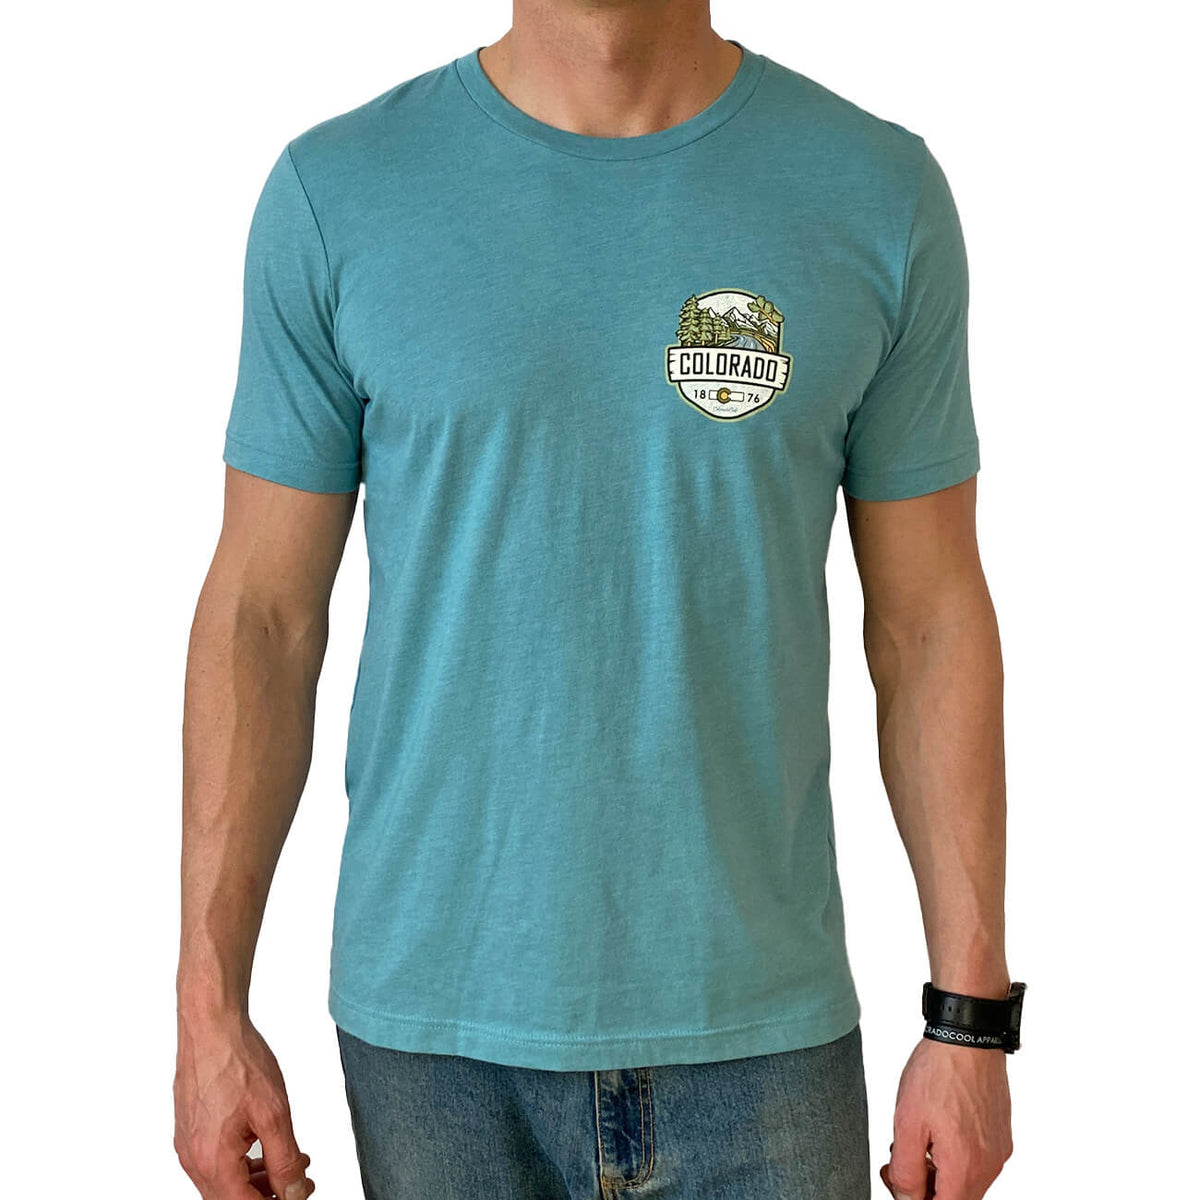 Colorado T-Shirt with Mountains